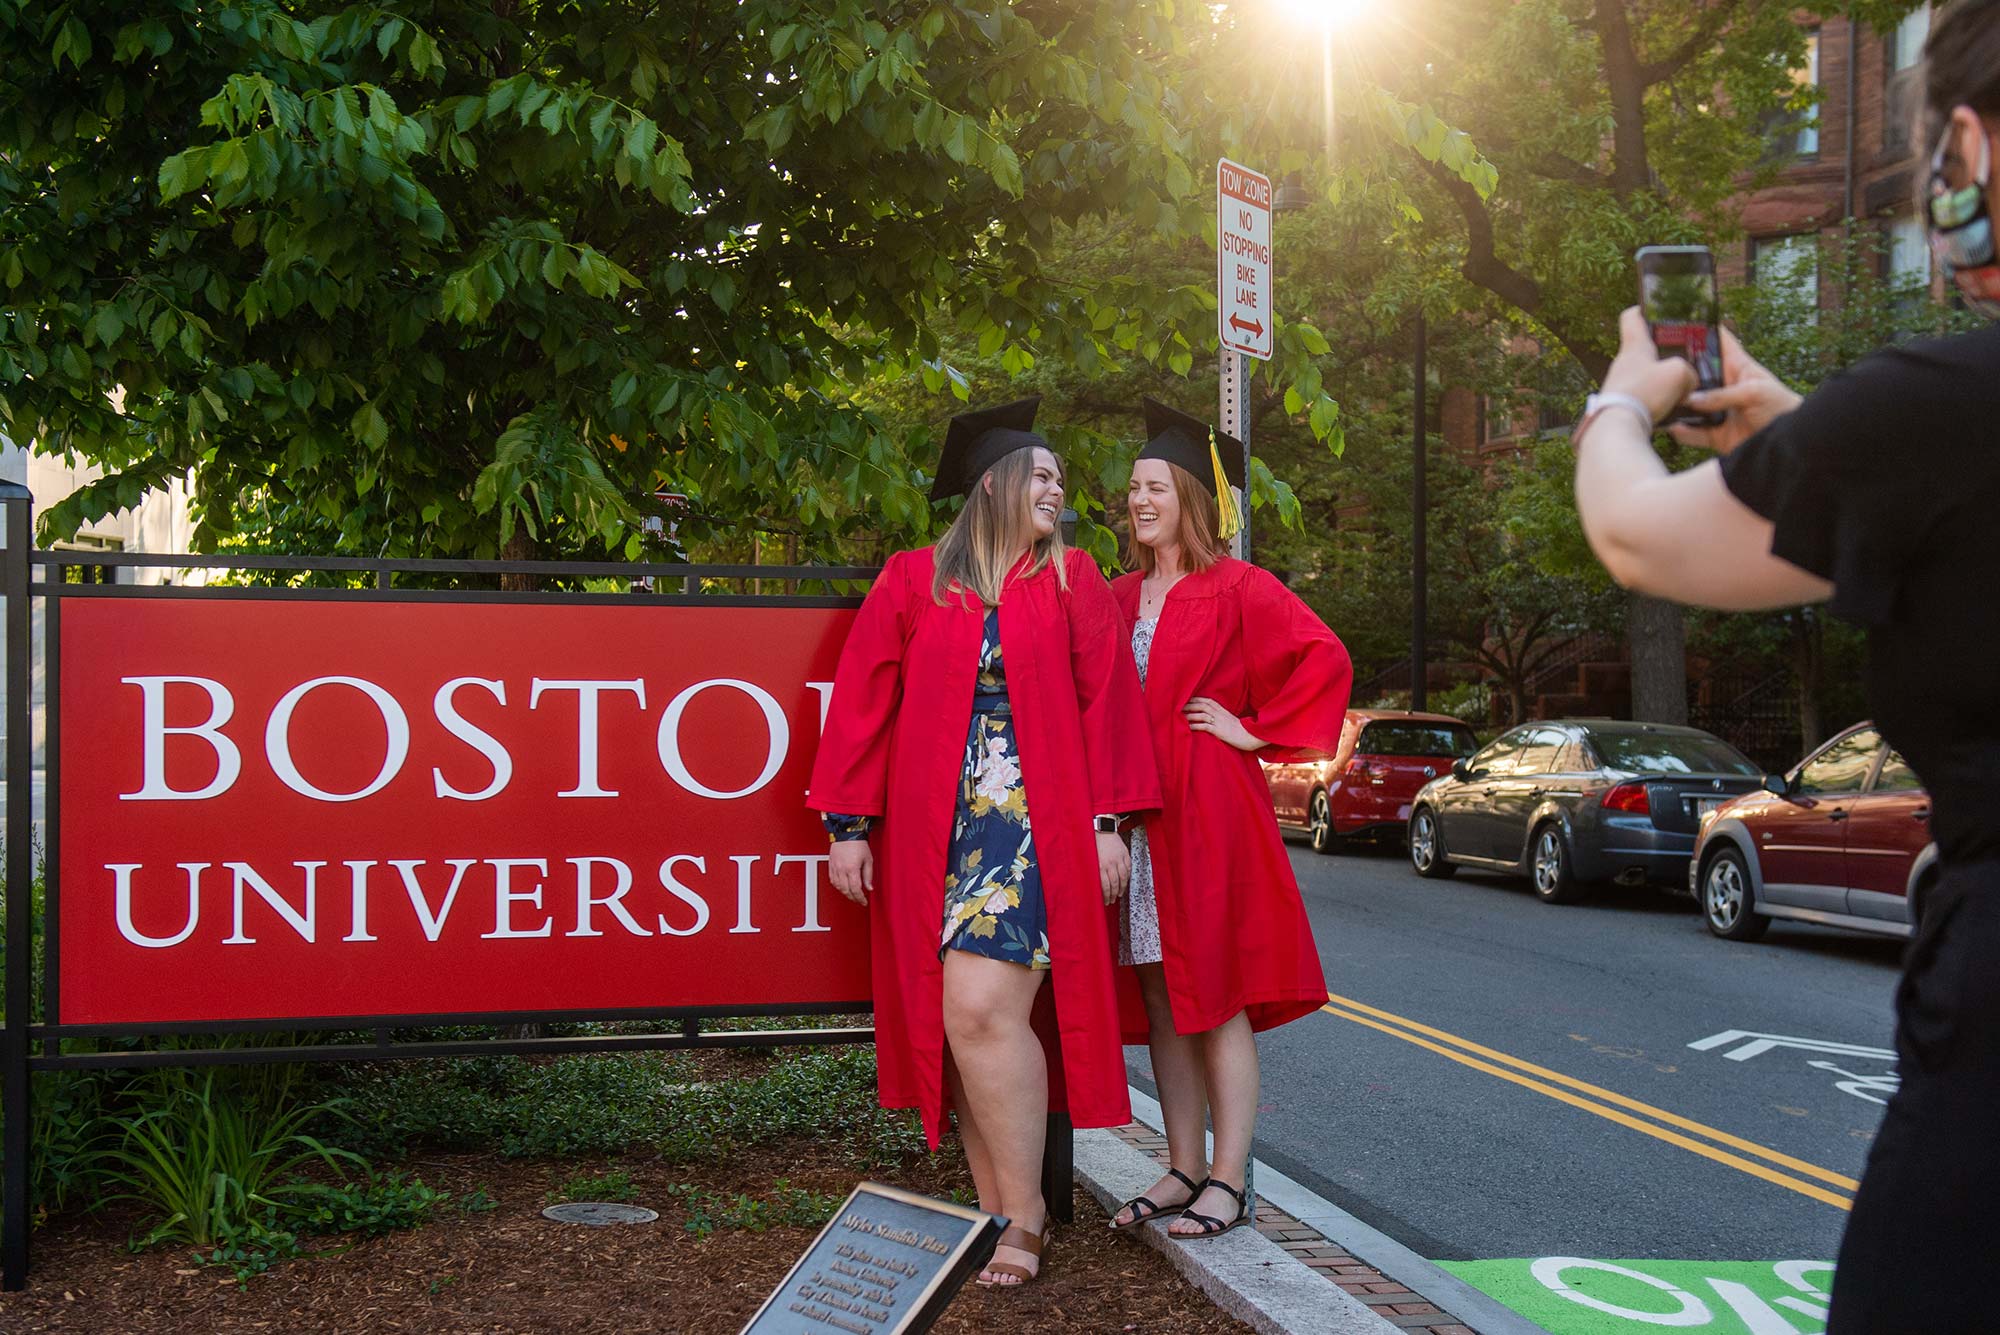 Photo of Claire Johnson (SAR’18, SSW’20, MPH’21), from left, and Kathryn Sparks (SSW’20) posing in their grad robes for Alex Ben-Jakob (SAR’17) (whose arm holding up a phone is seen in the right foreground) at the Myles Standish Plaza on May 26, 2020. Johnson and Sparks smile next to a big red "Boston University" sign.